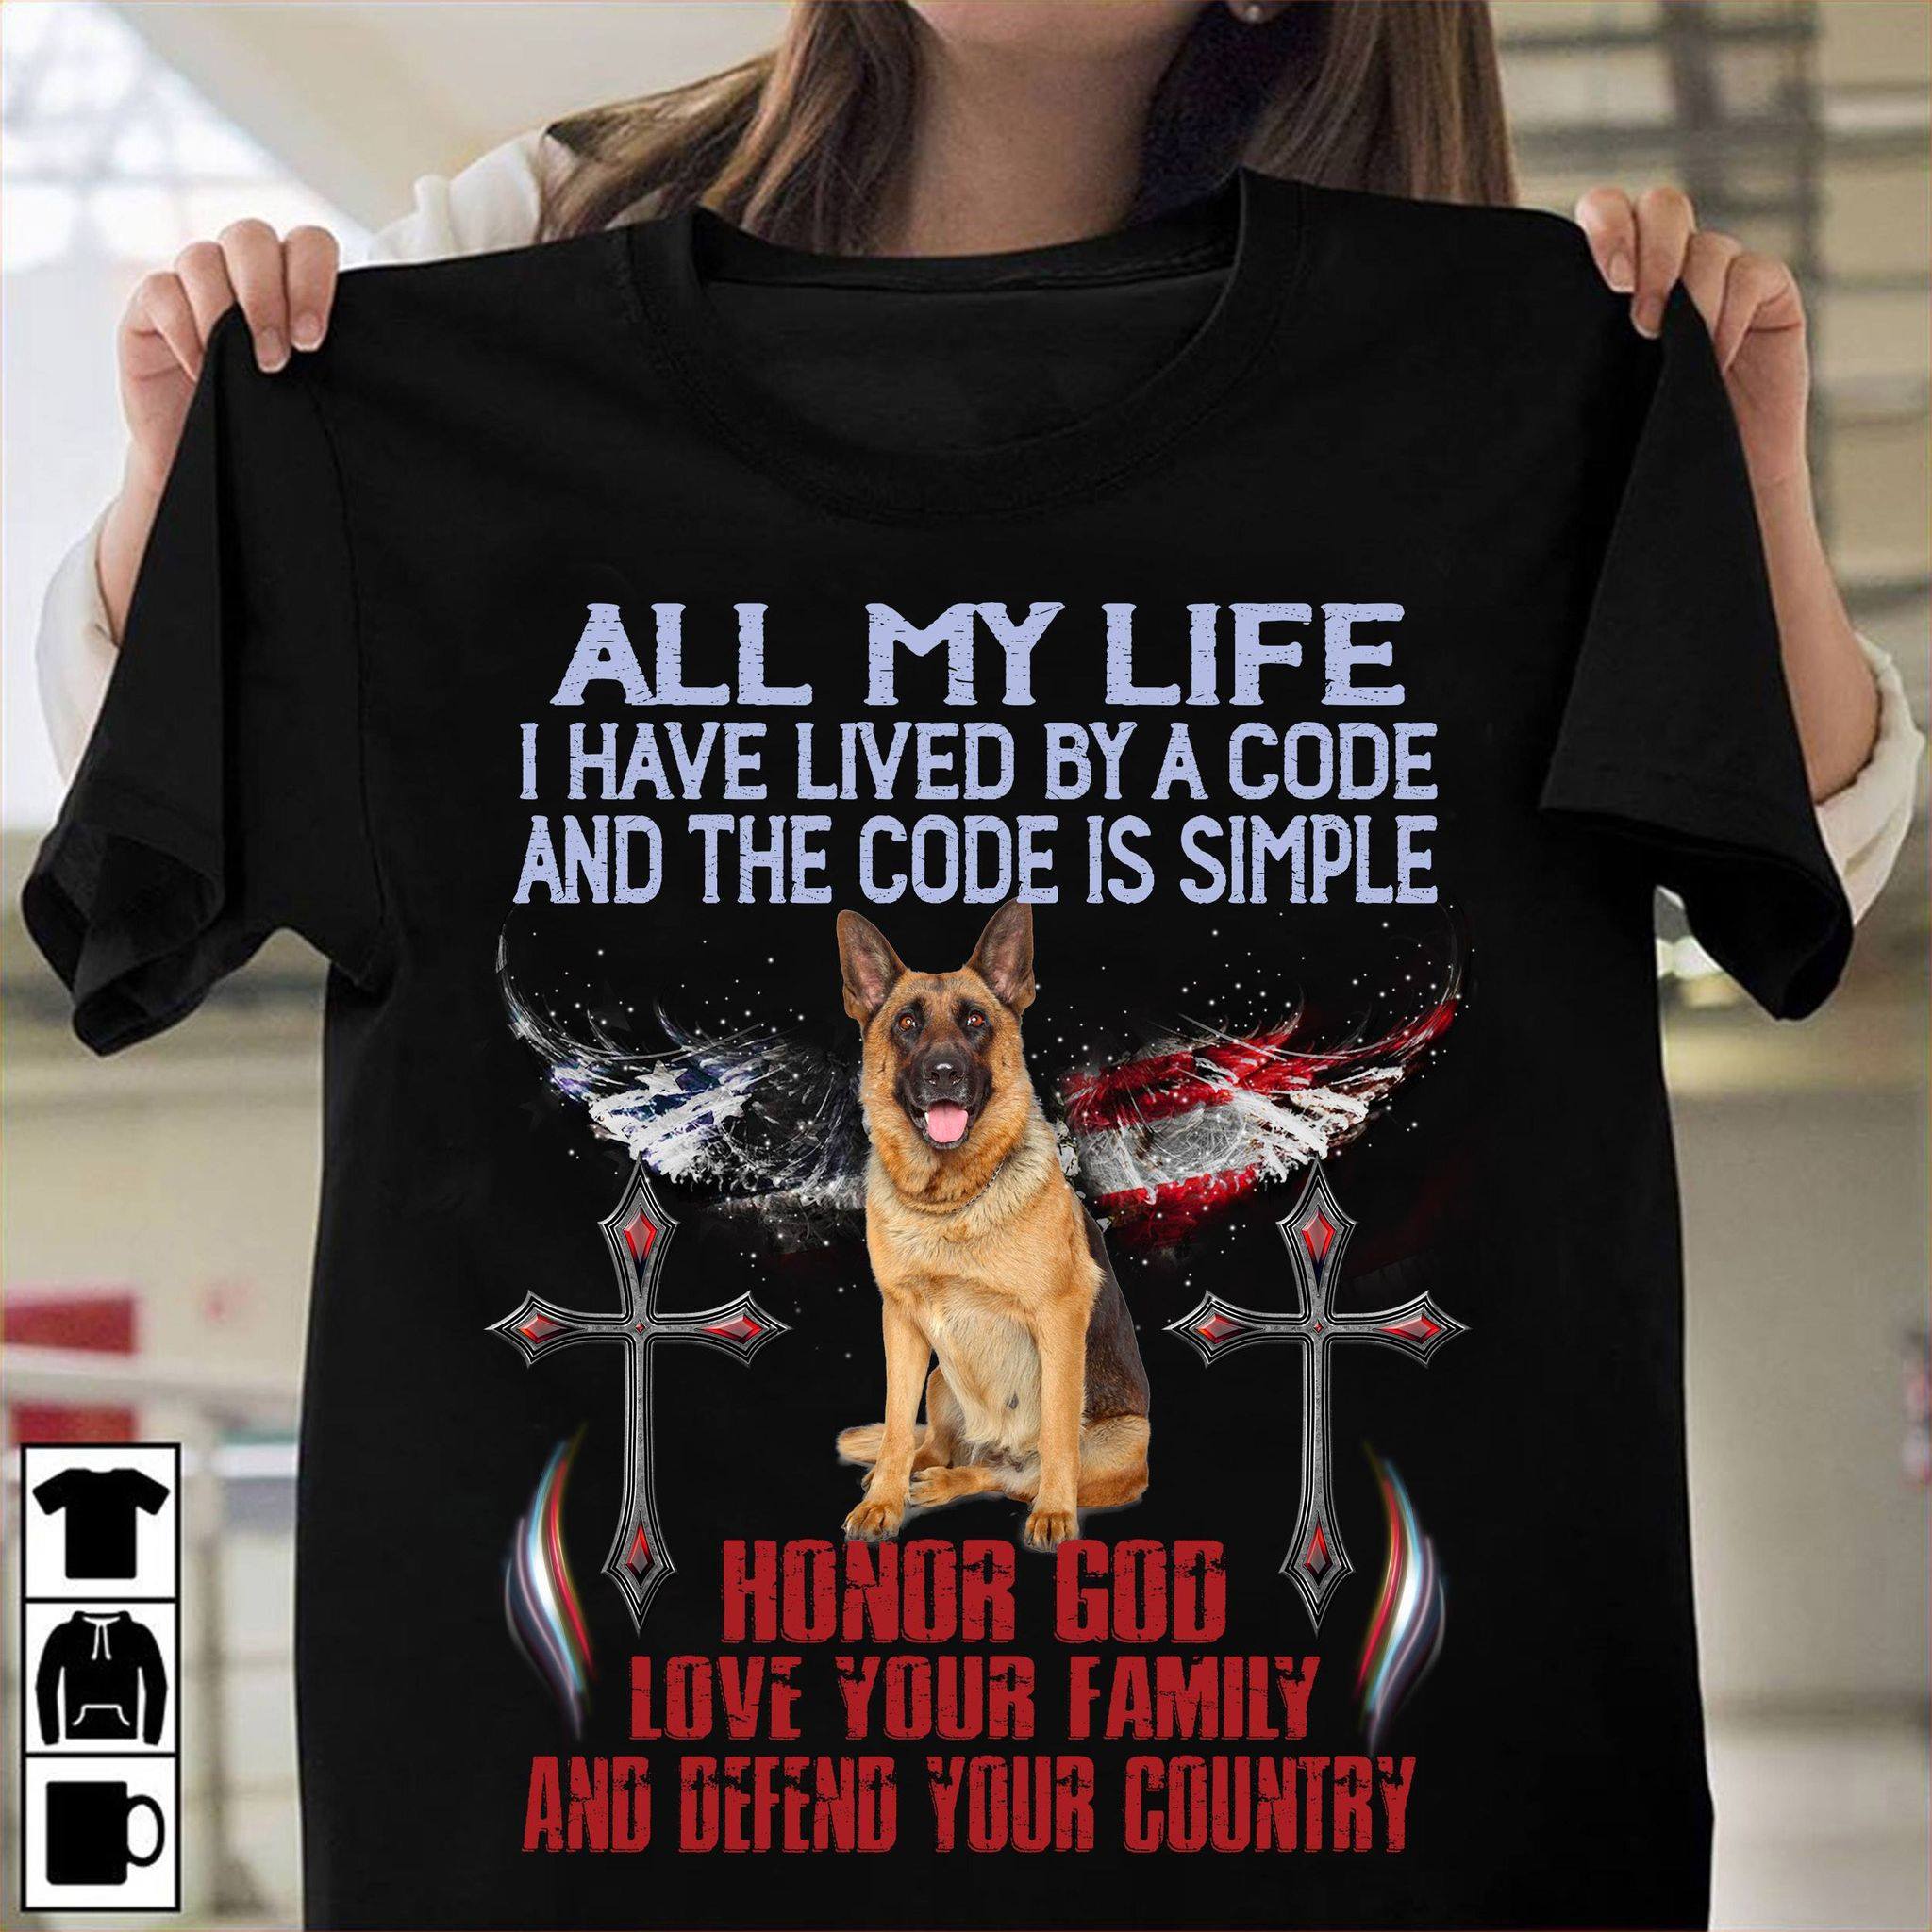 German Shepherd Dogs God – All my life i have lived by a code and the code is simple